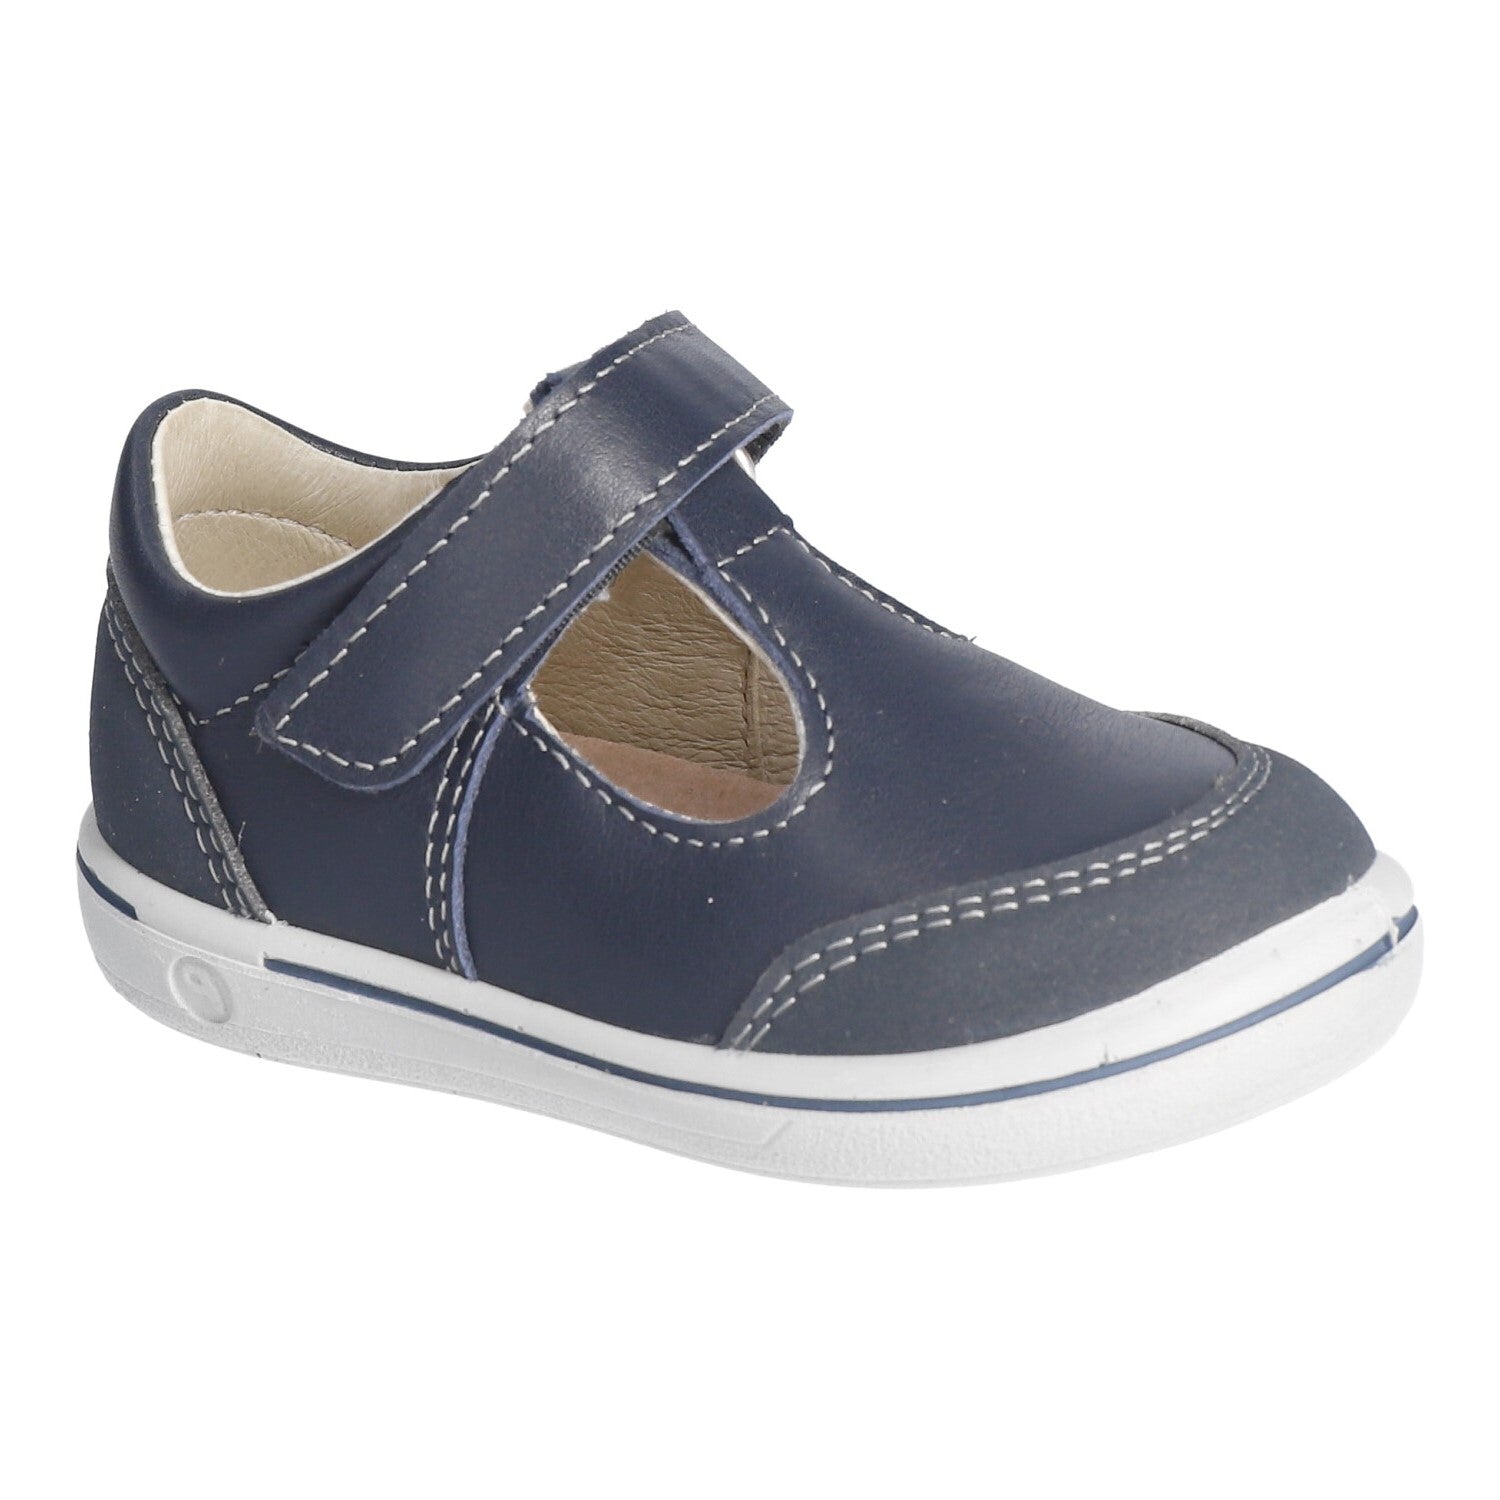 A unisex t bar shoe by Ricosta, style Winnie, in navy leather with velcro fastening. Right side view.